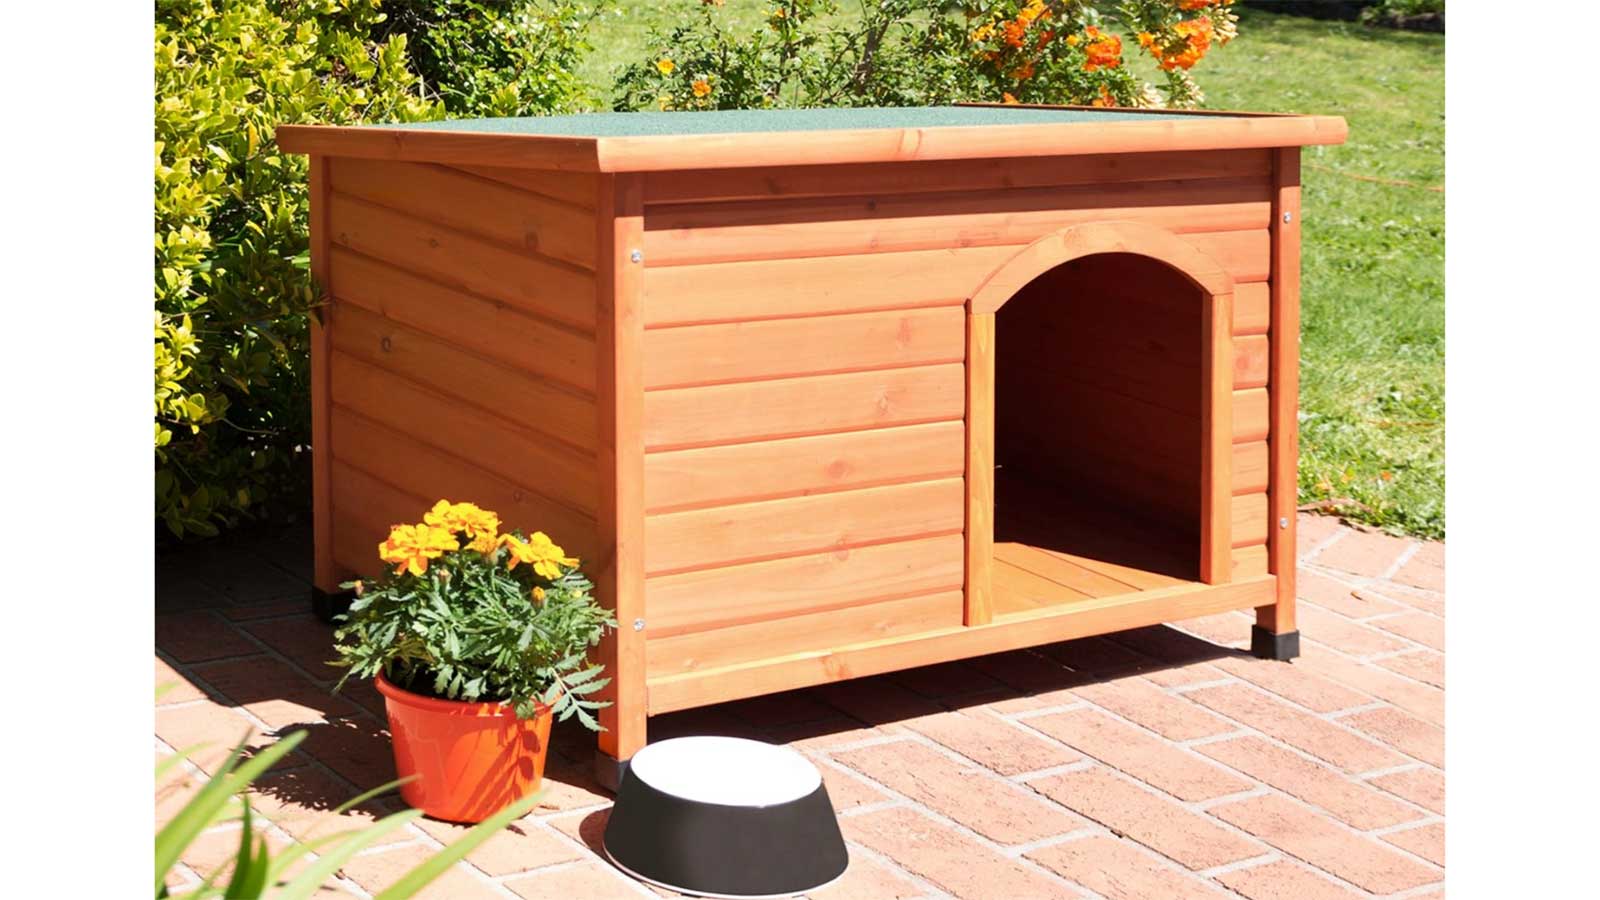 Moderate temperature of dog kennel img